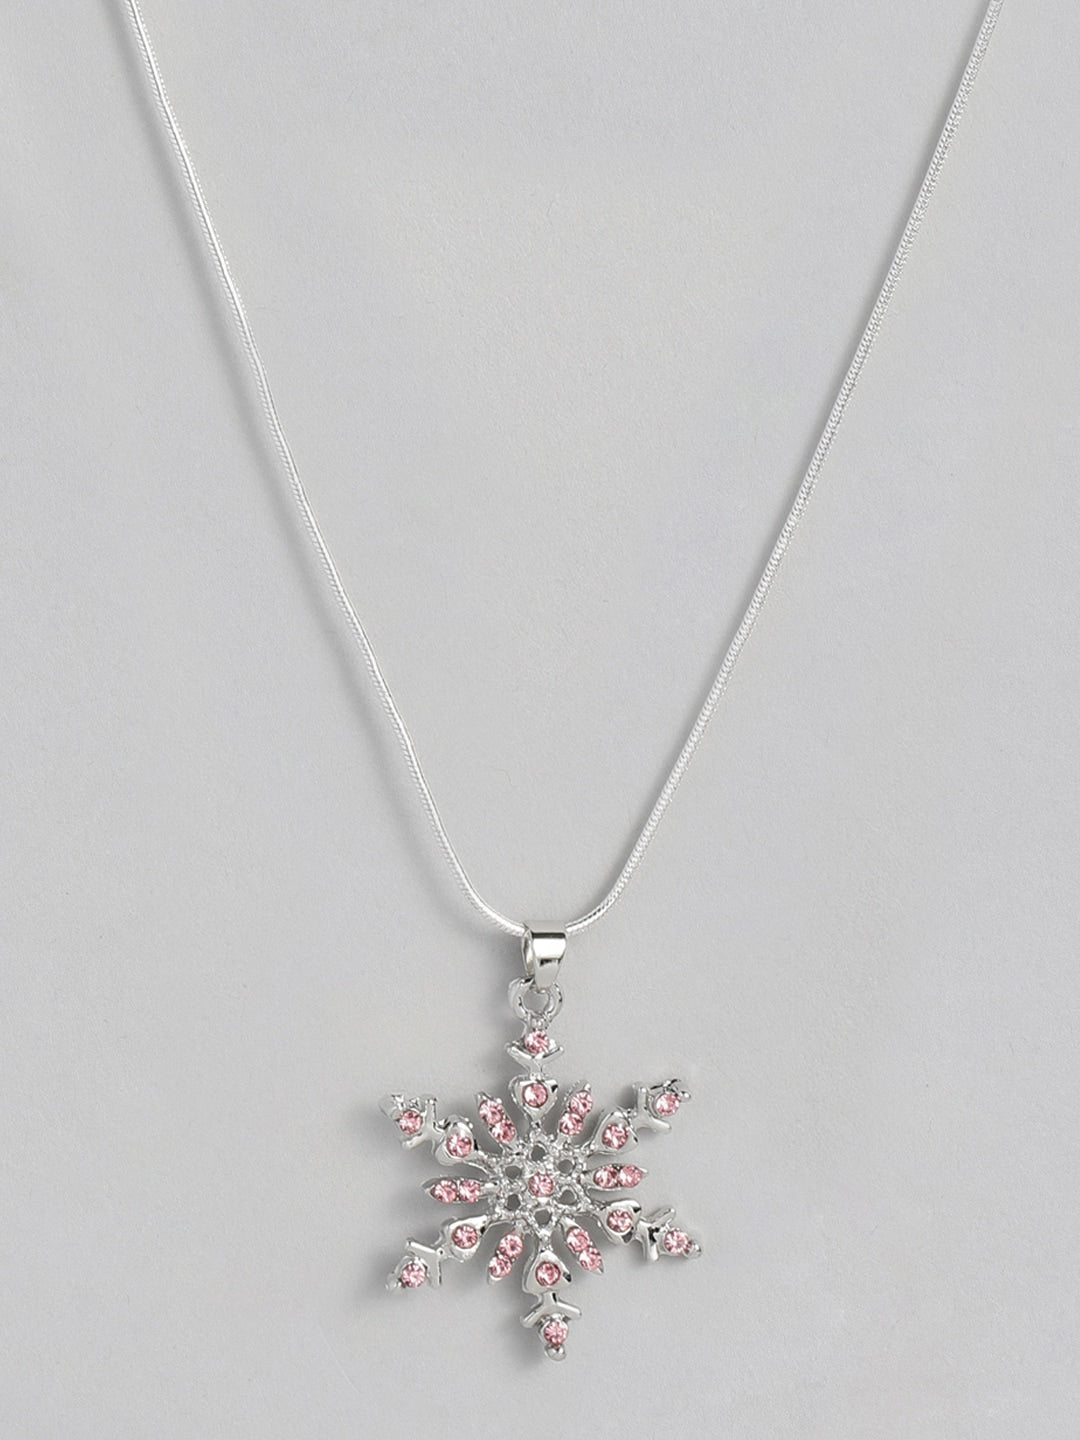 EL REGALO Women Pink & Silver-Toned Snow- Flake-Necklace Chain - for Women and Girls
Style ID: 16288036